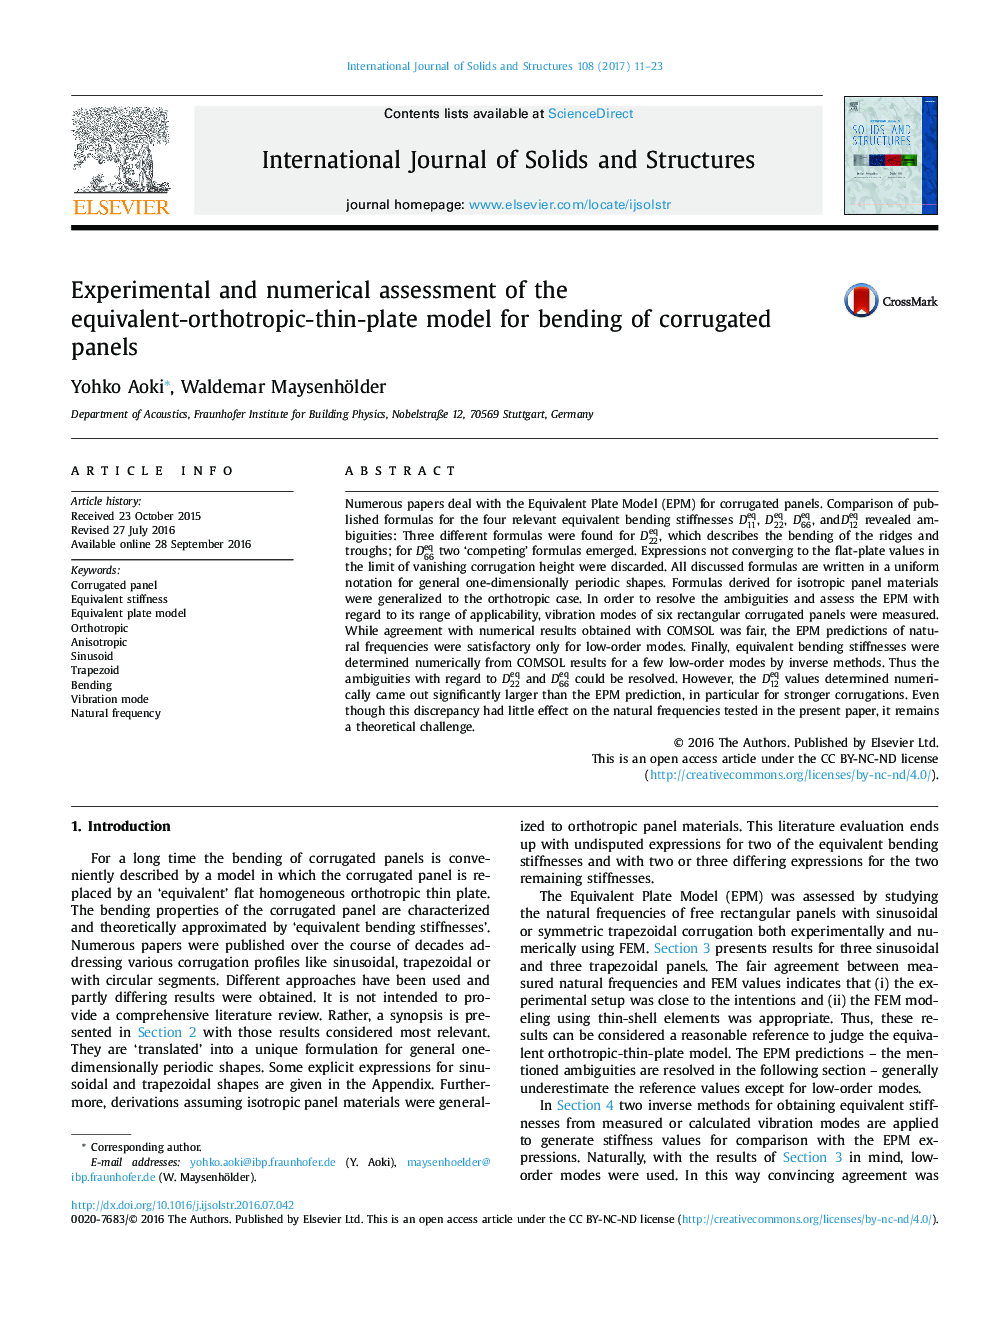 Experimental and numerical assessment of the equivalent-orthotropic-thin-plate model for bending of corrugated panels